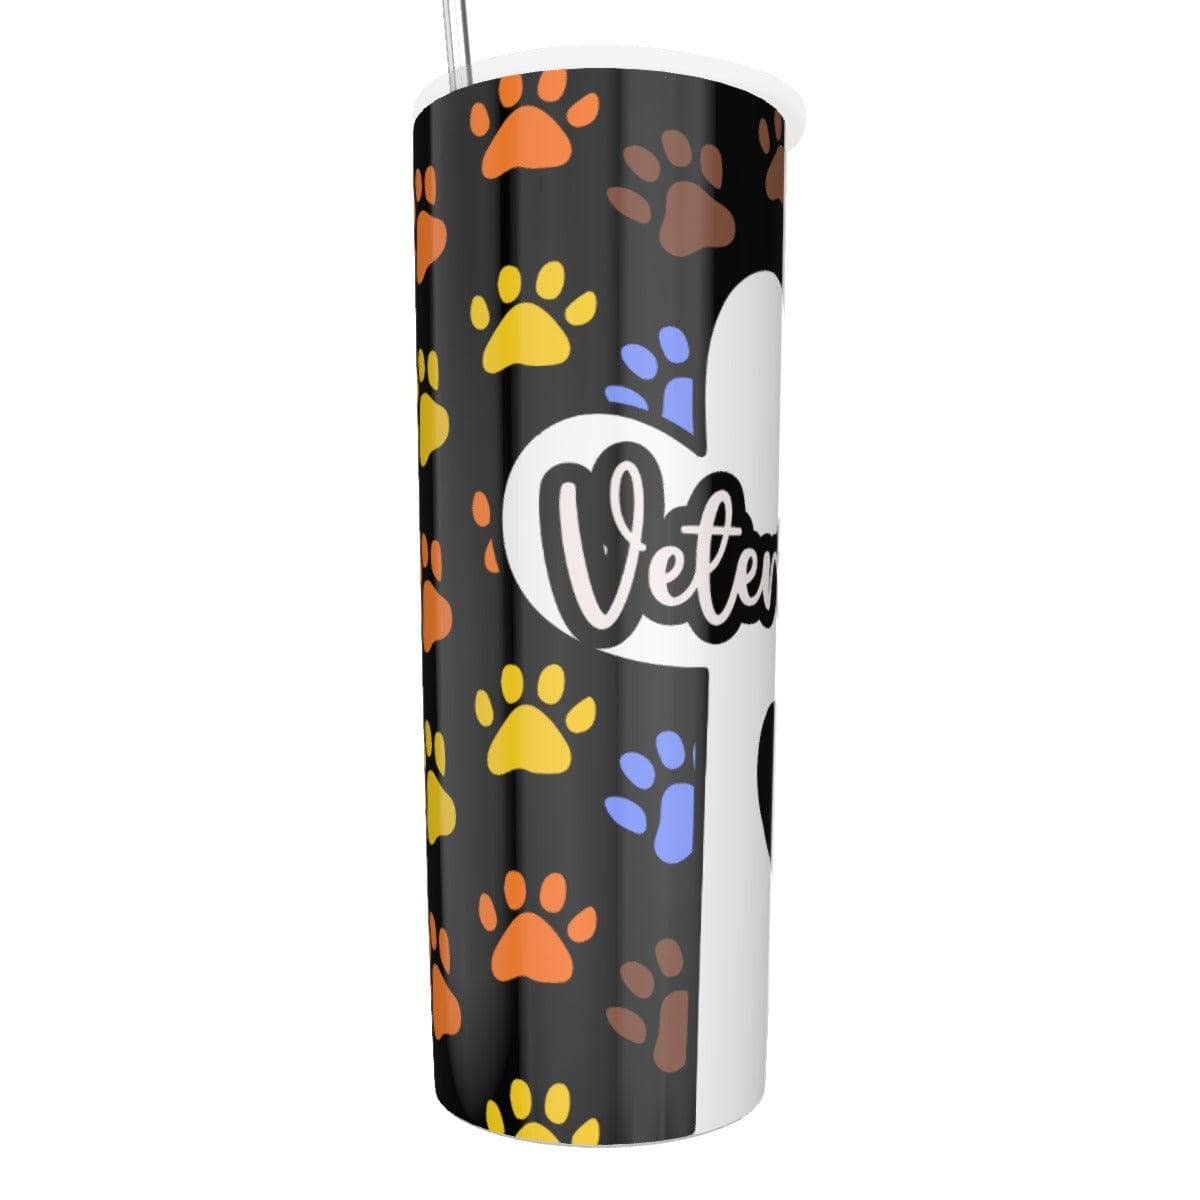 Vet Tumbler With Stainless Steel Straw 20oz - Thumbedtreats